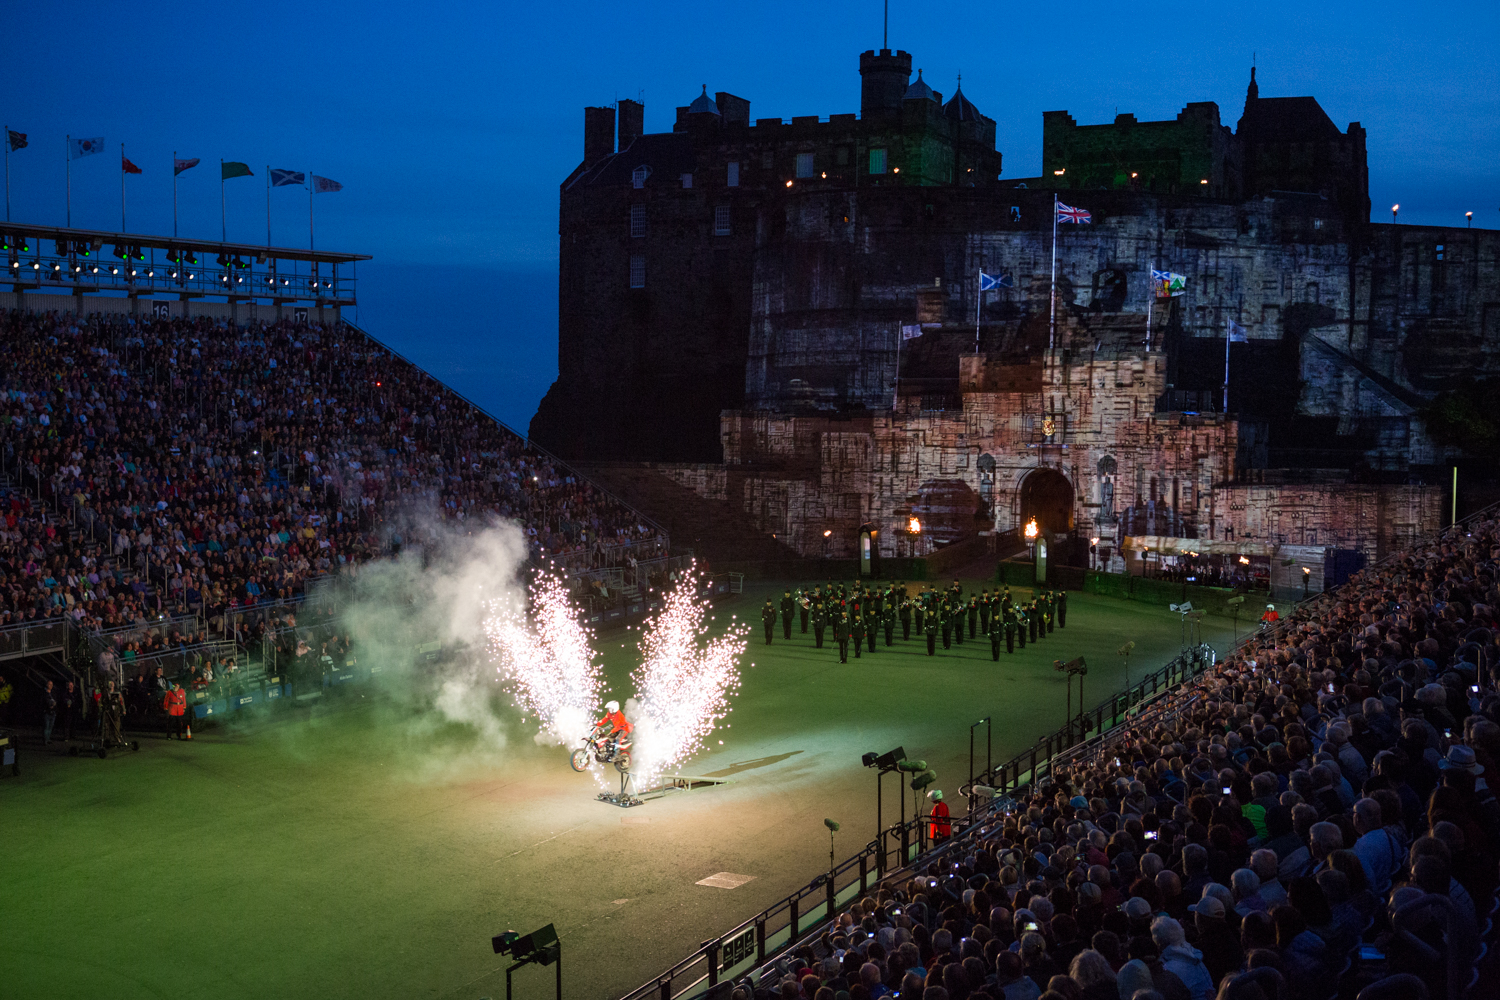  During the annual Military Tattoo in Edinburgh, Scotland, a motorcycle stunt driver takes off amongst fireworks. The performance is held for about three weeks with the Edinburgh Castle as a backdrop. 